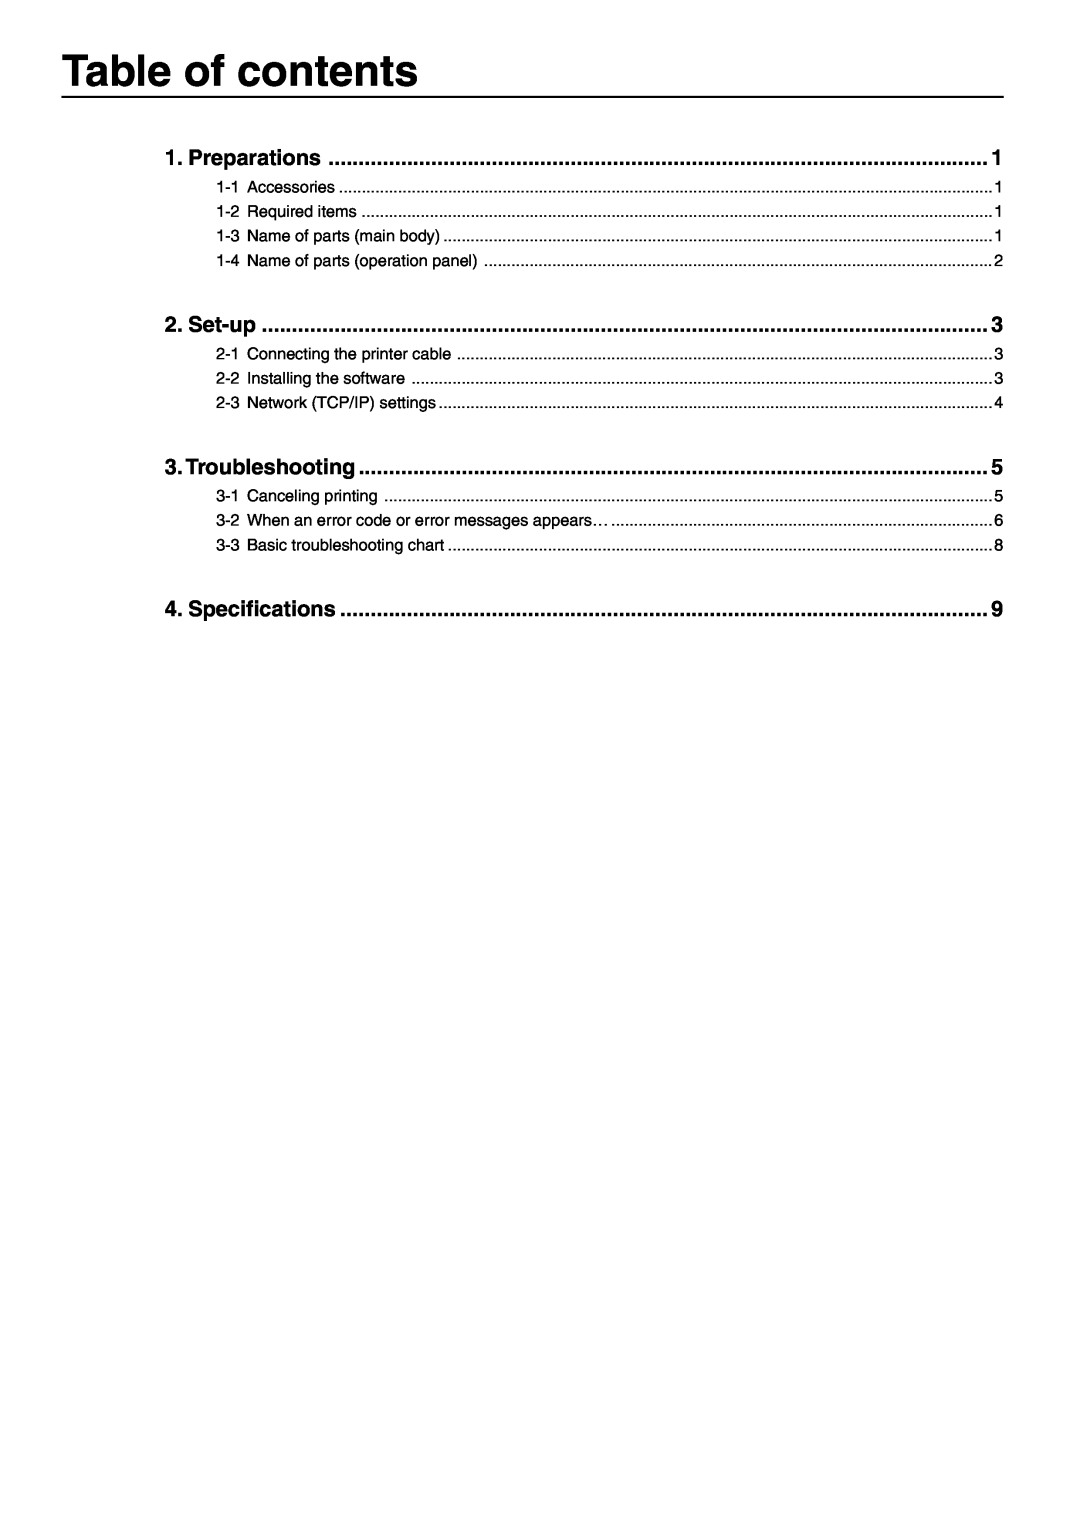 Oce North America OP14 manual Table of contents, Preparations, Set-up, Troubleshooting, Specifications 